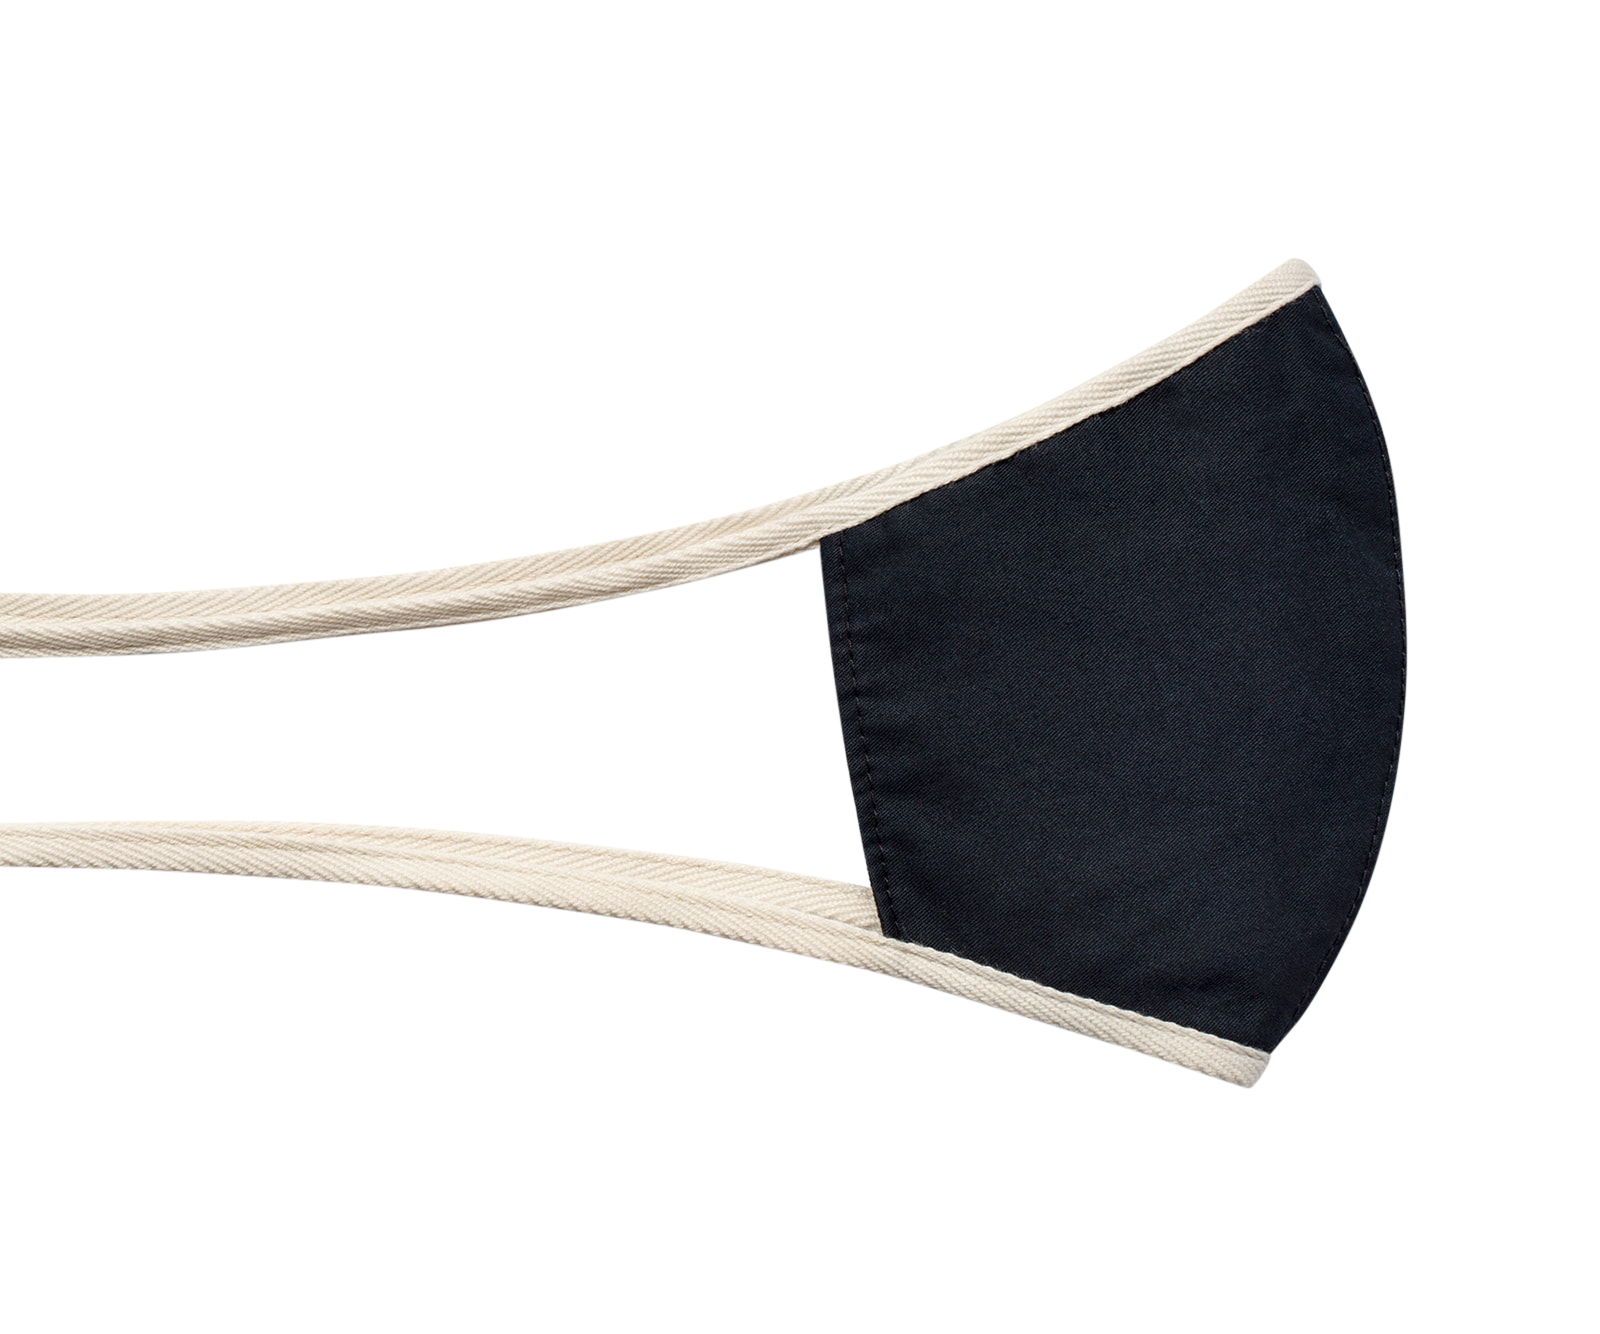 XWASTED pure navy (white string) facemask